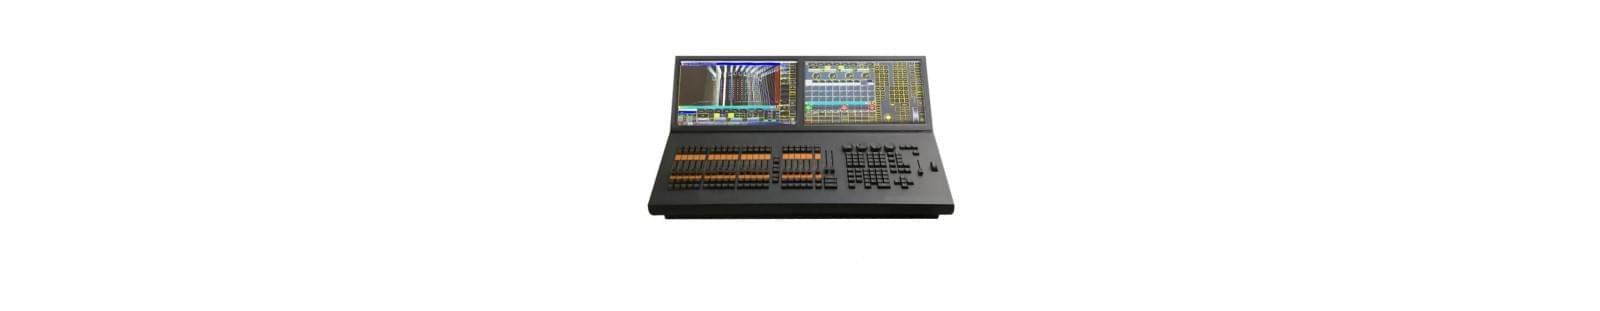 Grandma 2 Lighting Controller with 2 Touch Displays for DMX Console (EL-MA2 BLACK HORSE)